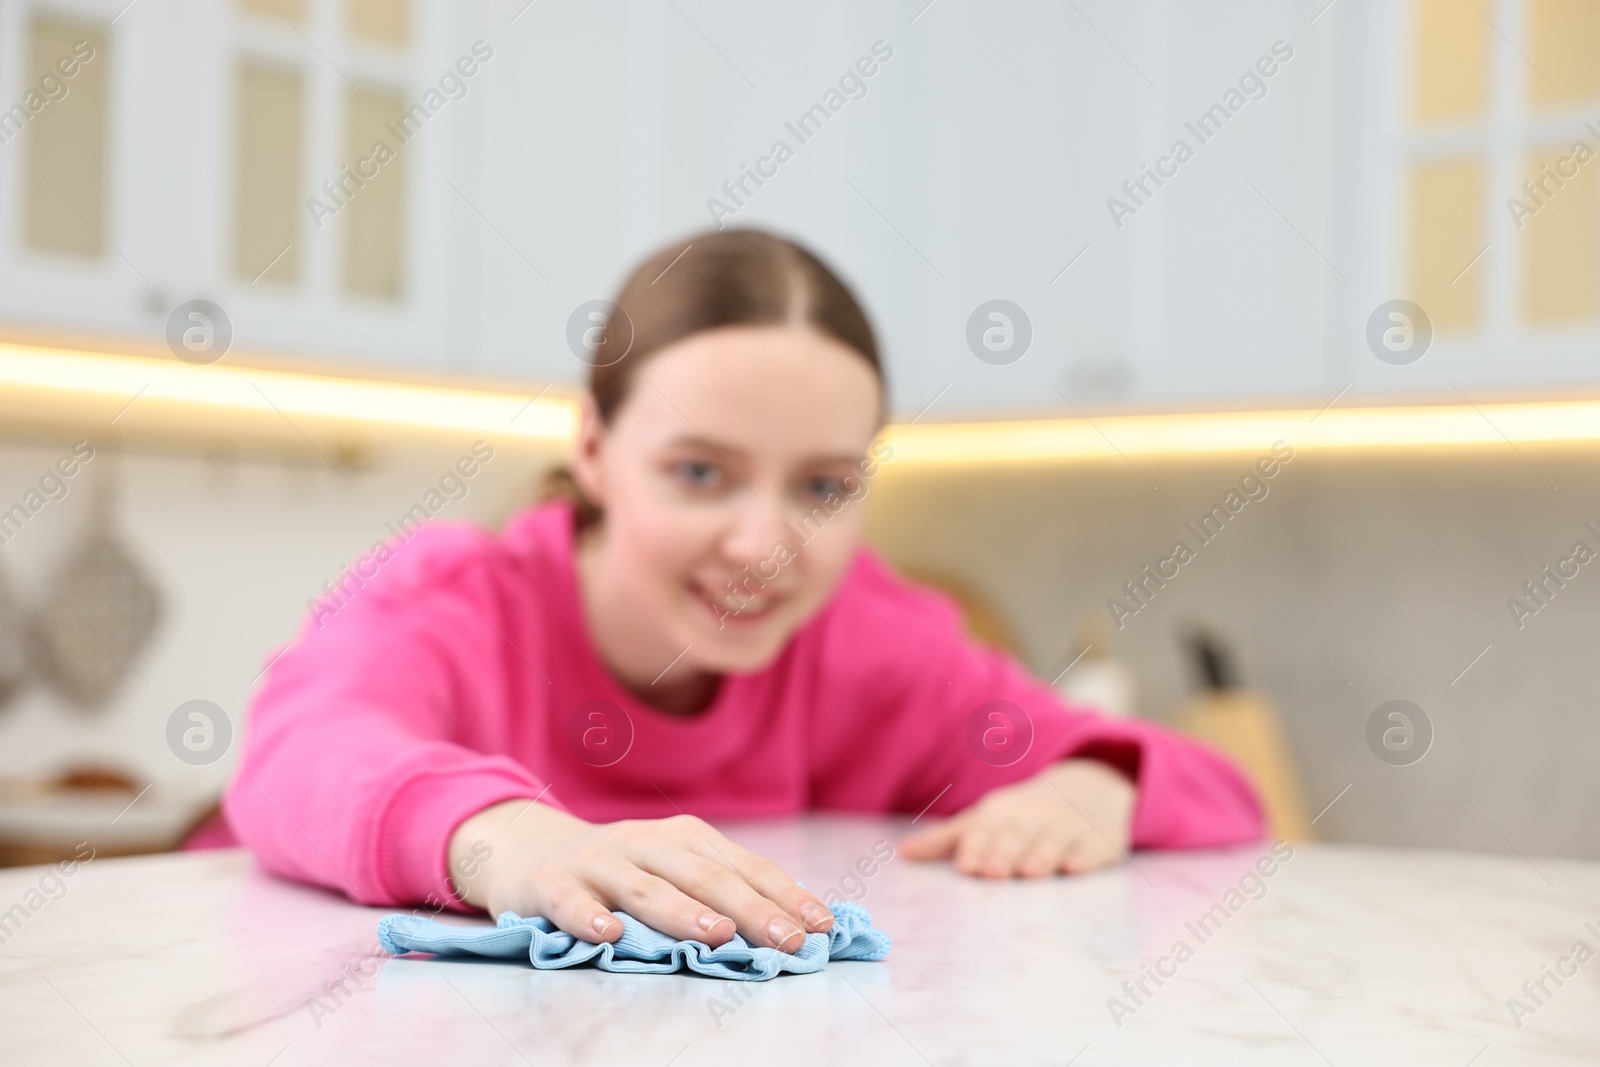 Photo of Woman cleaning white marble table with rag in kitchen, selective focus